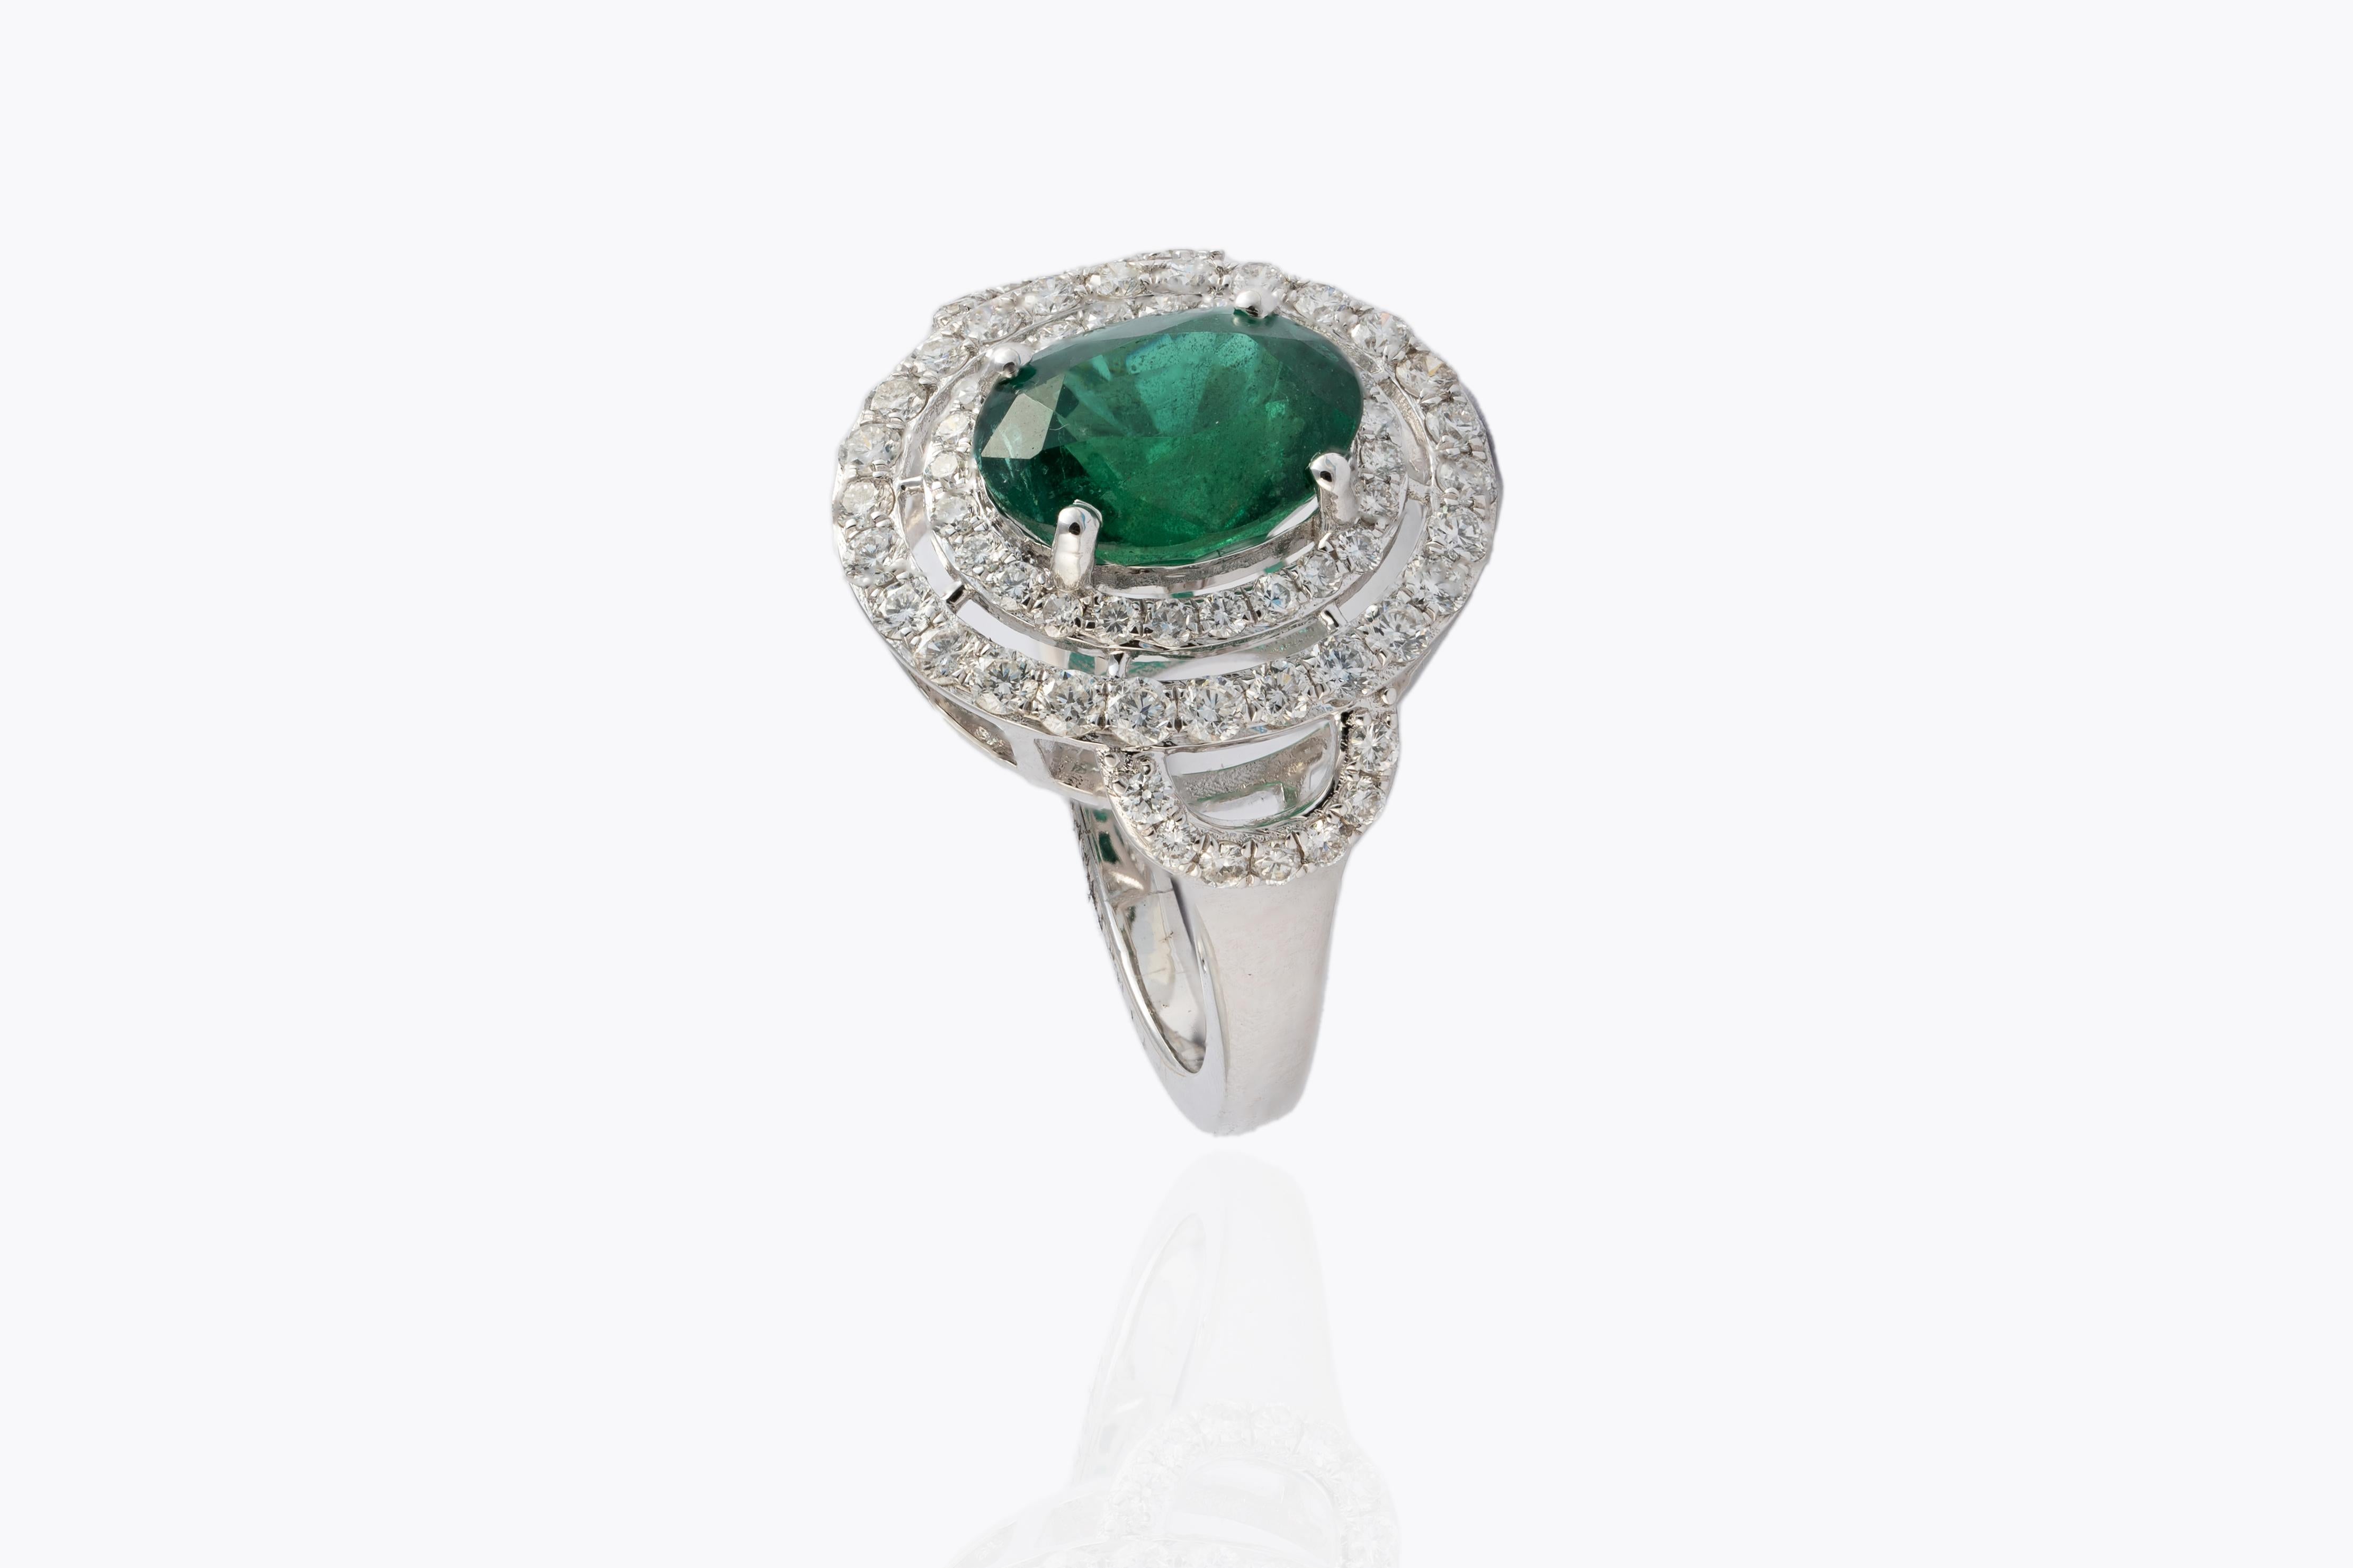 Emerald Cut 3.36cts Zambian Emerald Ring with 1.01cts Diamonds and 14k Gold For Sale